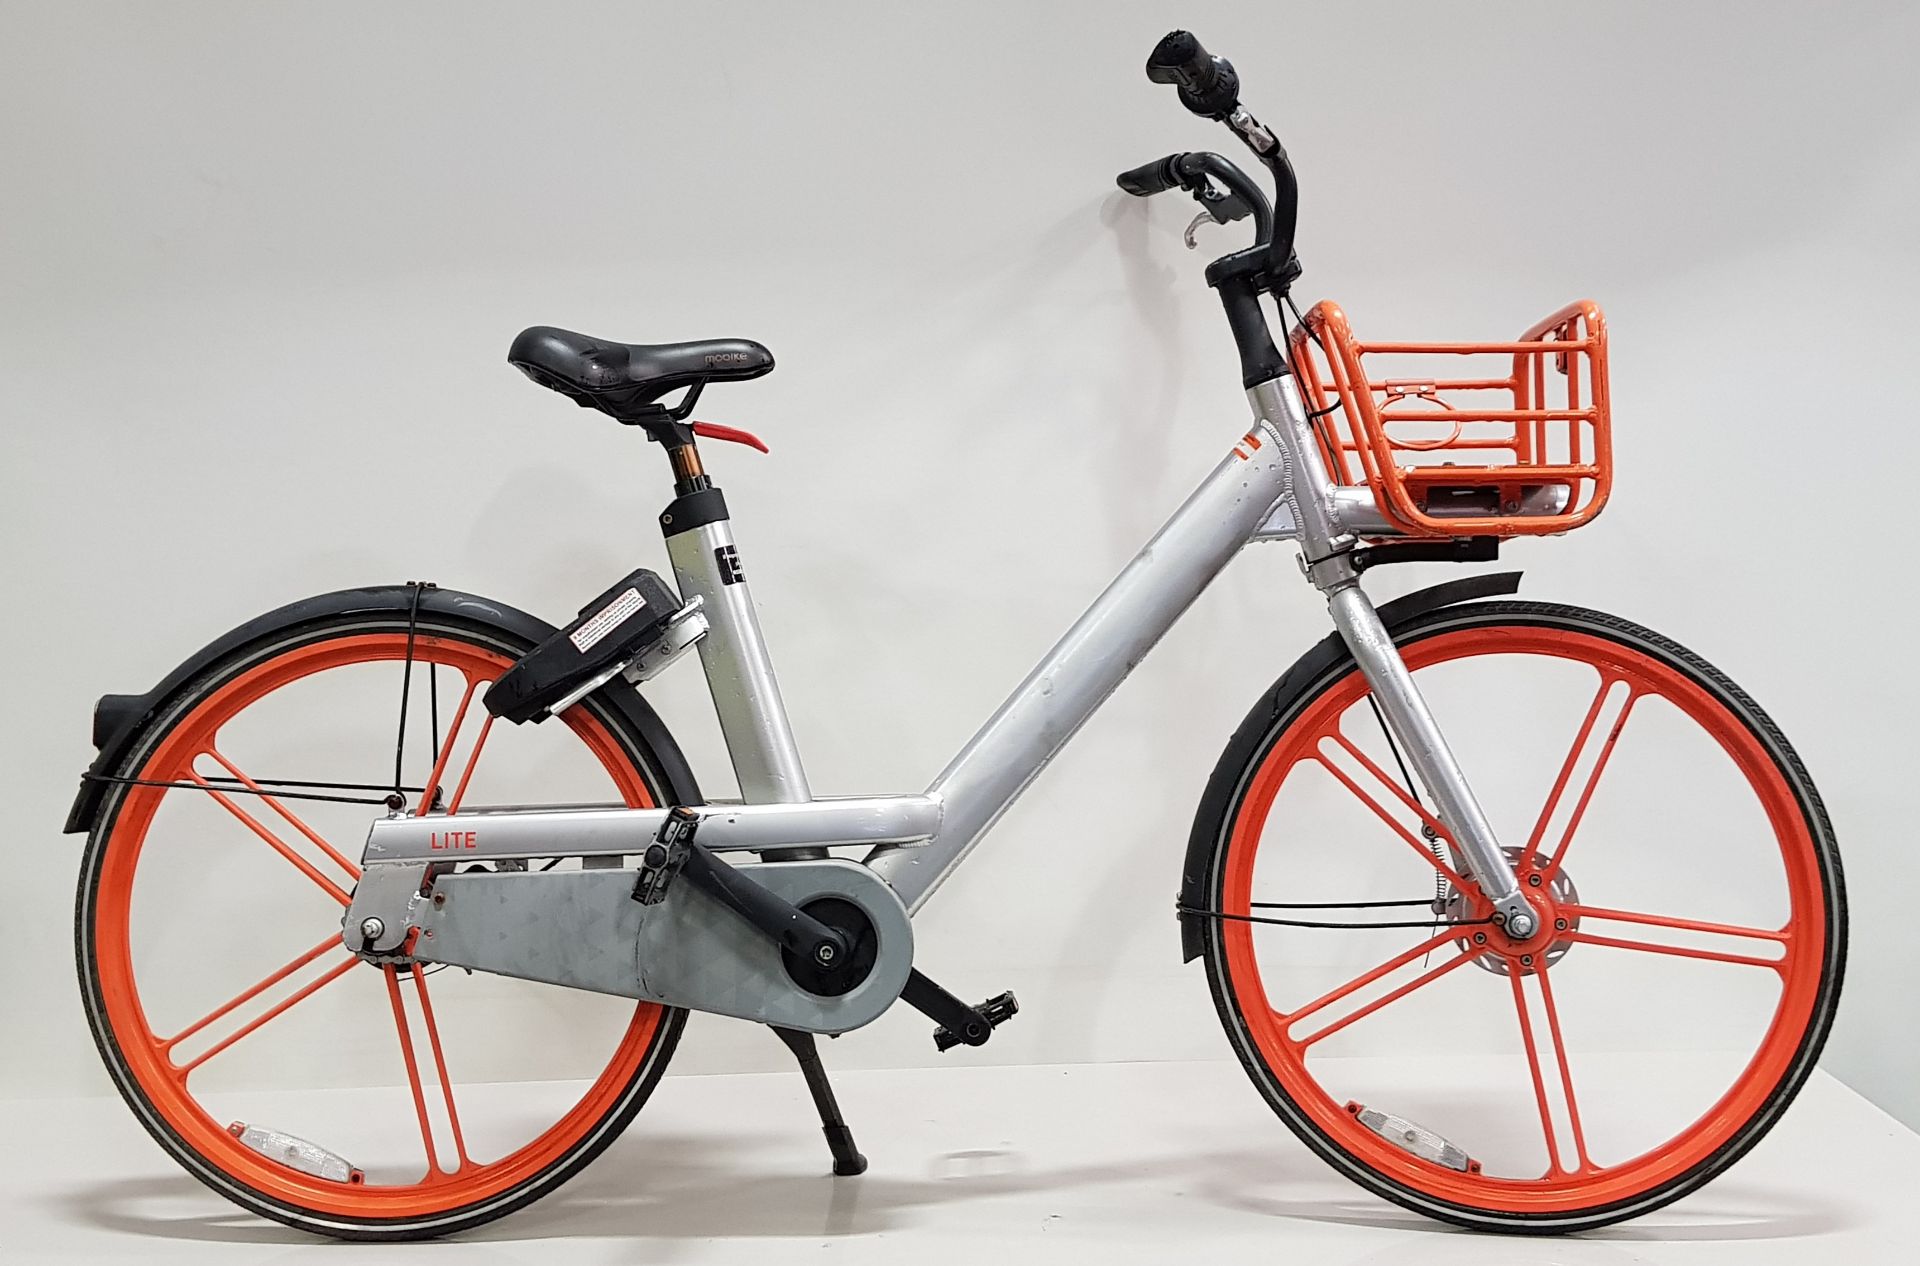 CITY BICYCLE - ROBUST ALUMINIUM 19 X 48 FRAME, SOLID PUNCTURE PROOF 24 TYRES, DYNAMO BUILT INTO